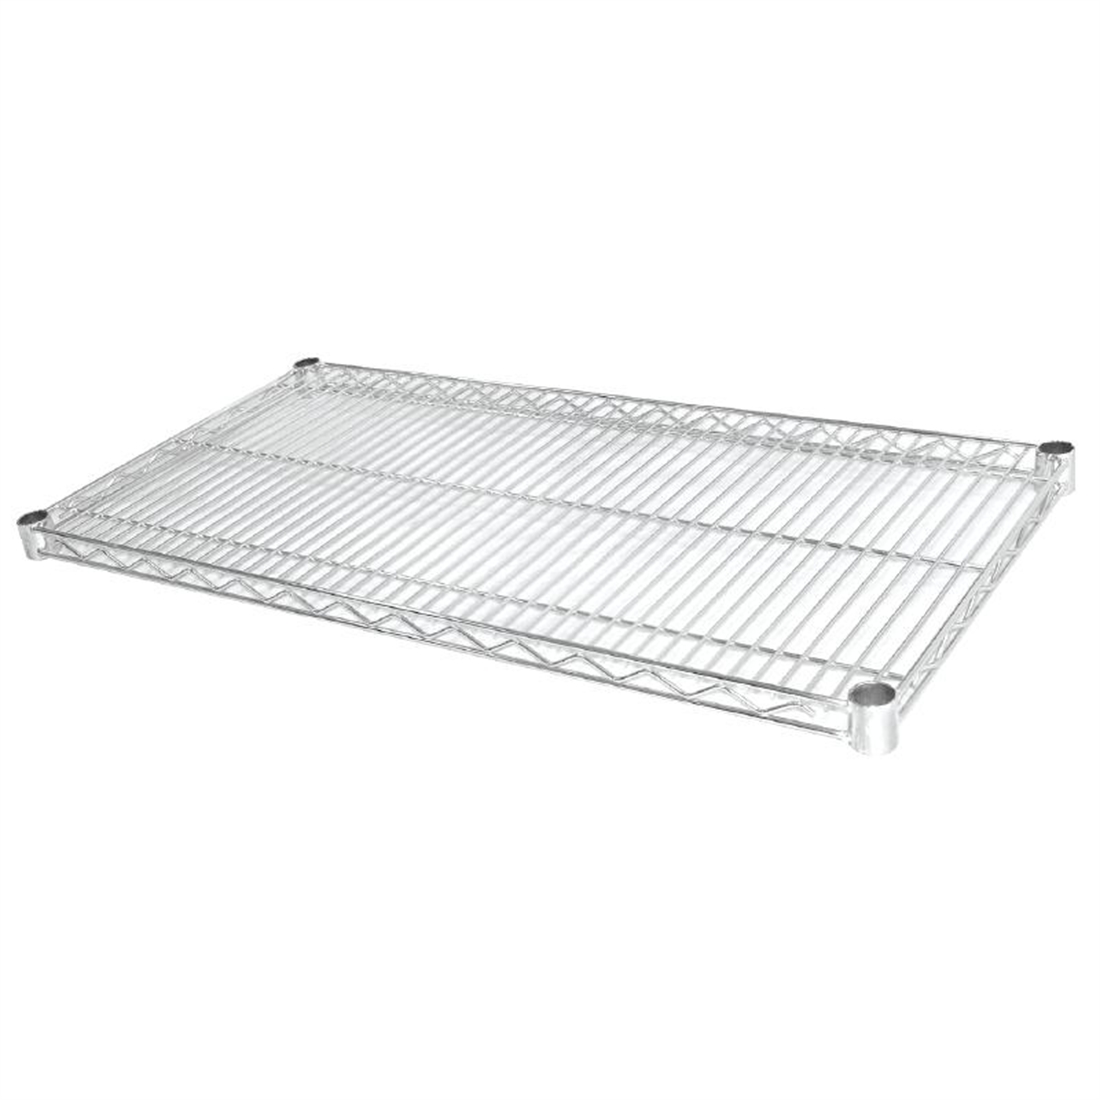 Vogue Chrome Wire Shelves 915x610mm Pack of 2